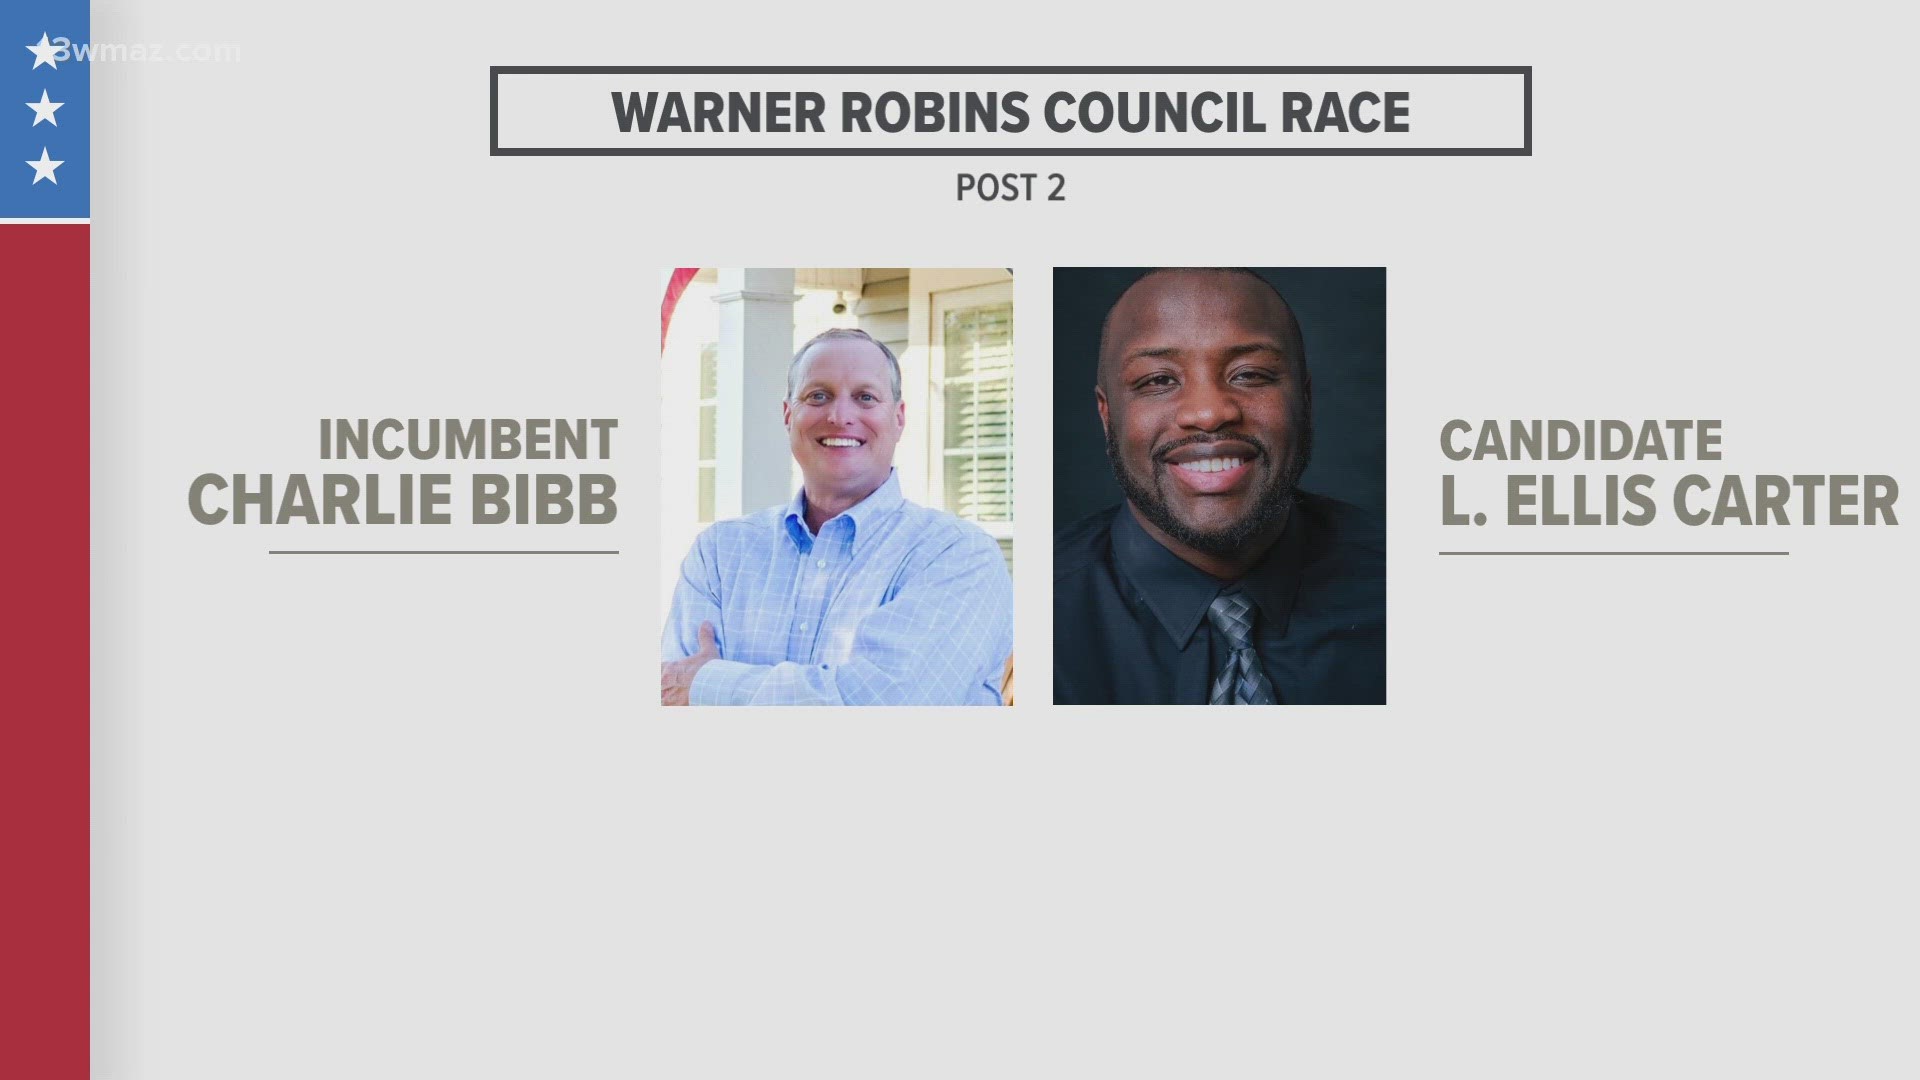 The candidates are Incumbent Charlie Bibb and L. Ellis Carter